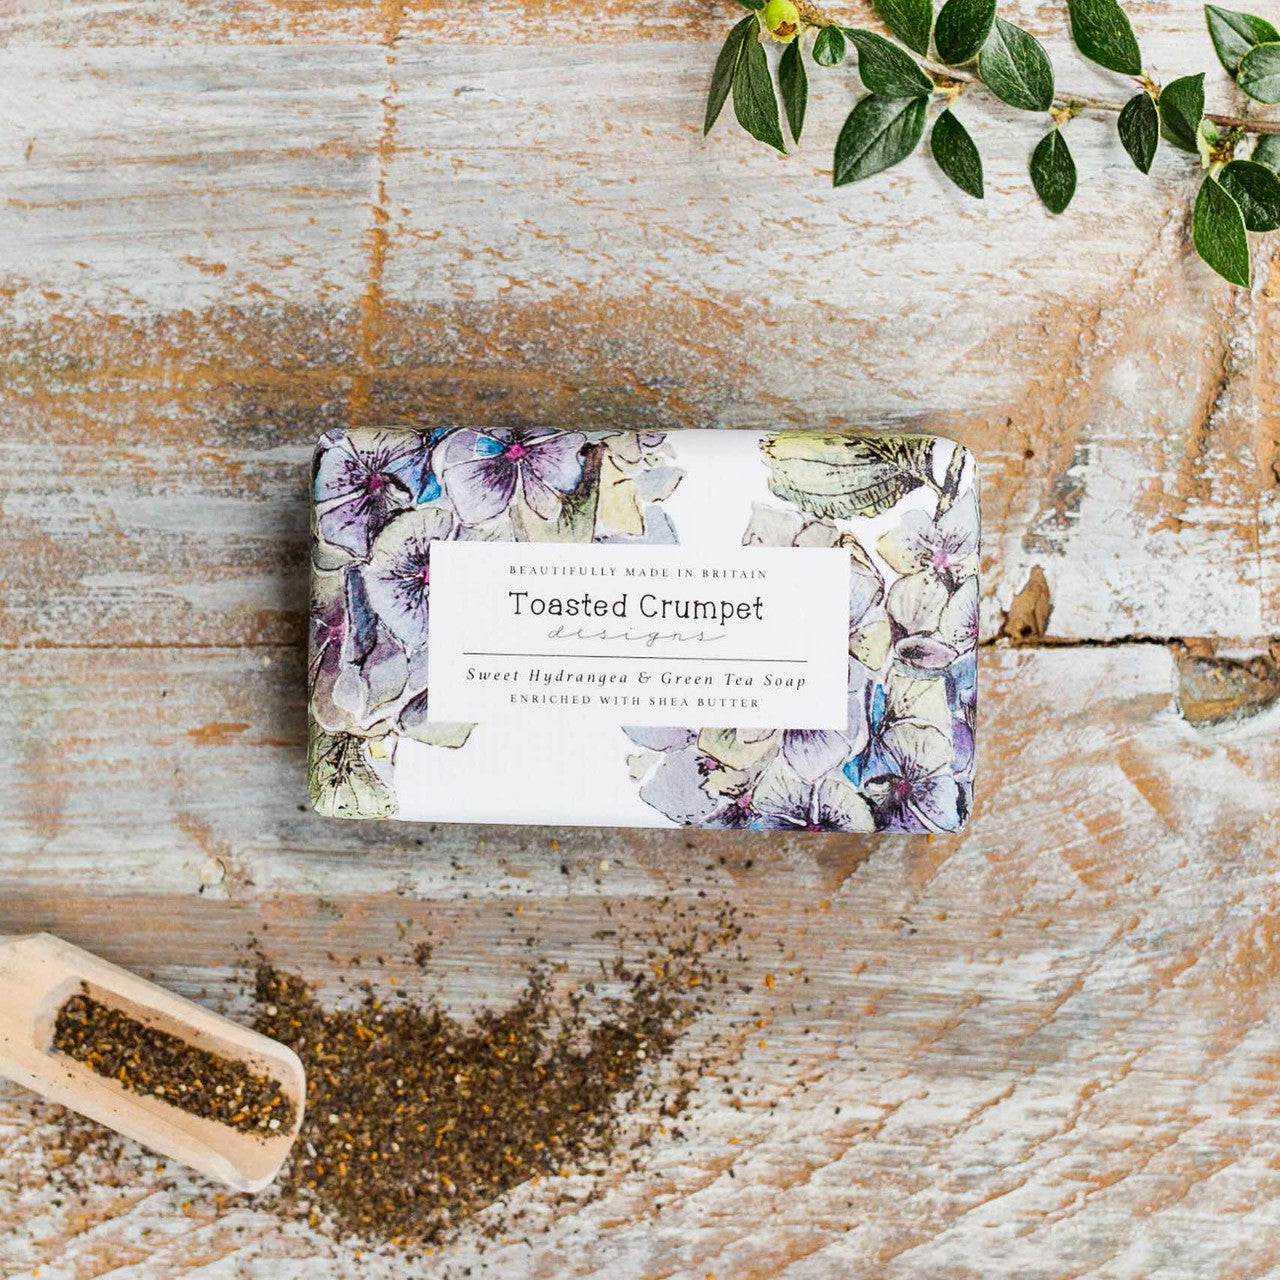 Sweet Hydrangea & Green Tea Soap by Toasted Crumpet.